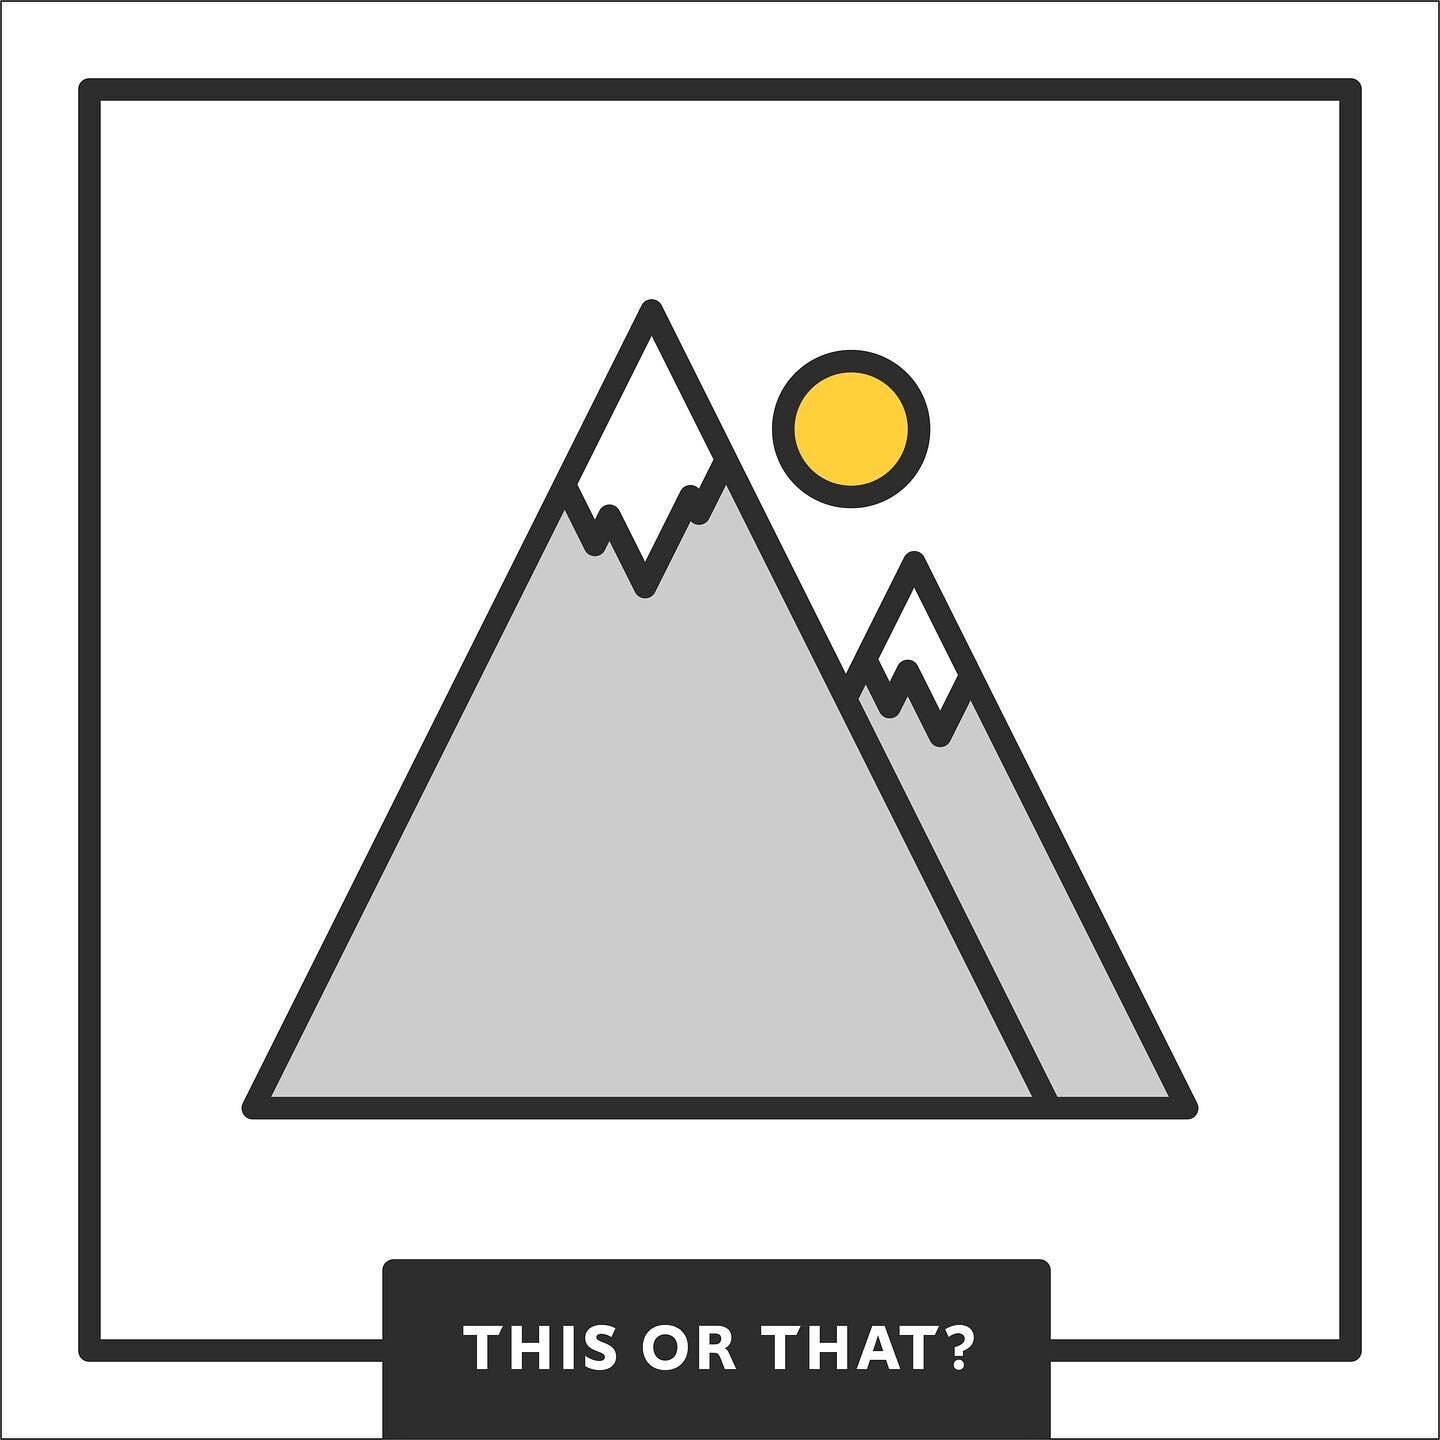 Preferred vacation spot, mountains or beach? Tell us in the comments and vote in our story! 🗻 🏖 #thisorthat #mountains #beach